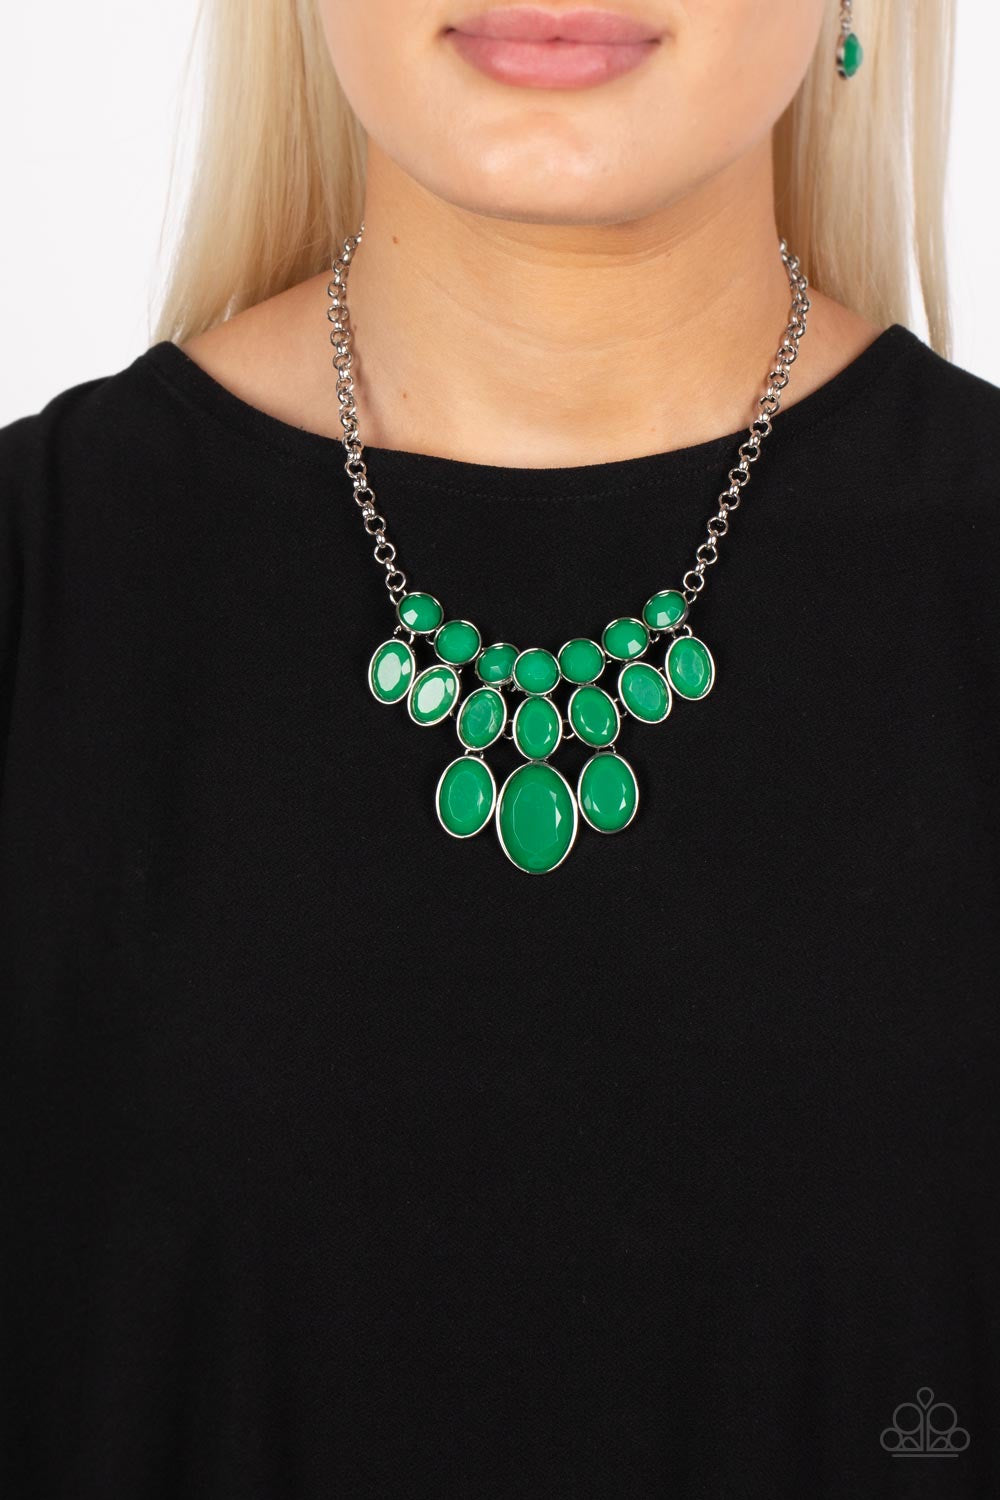 Bead Necklace - Paparazzi Delectable Daydream - Green Necklace Paparazzi jewelry image